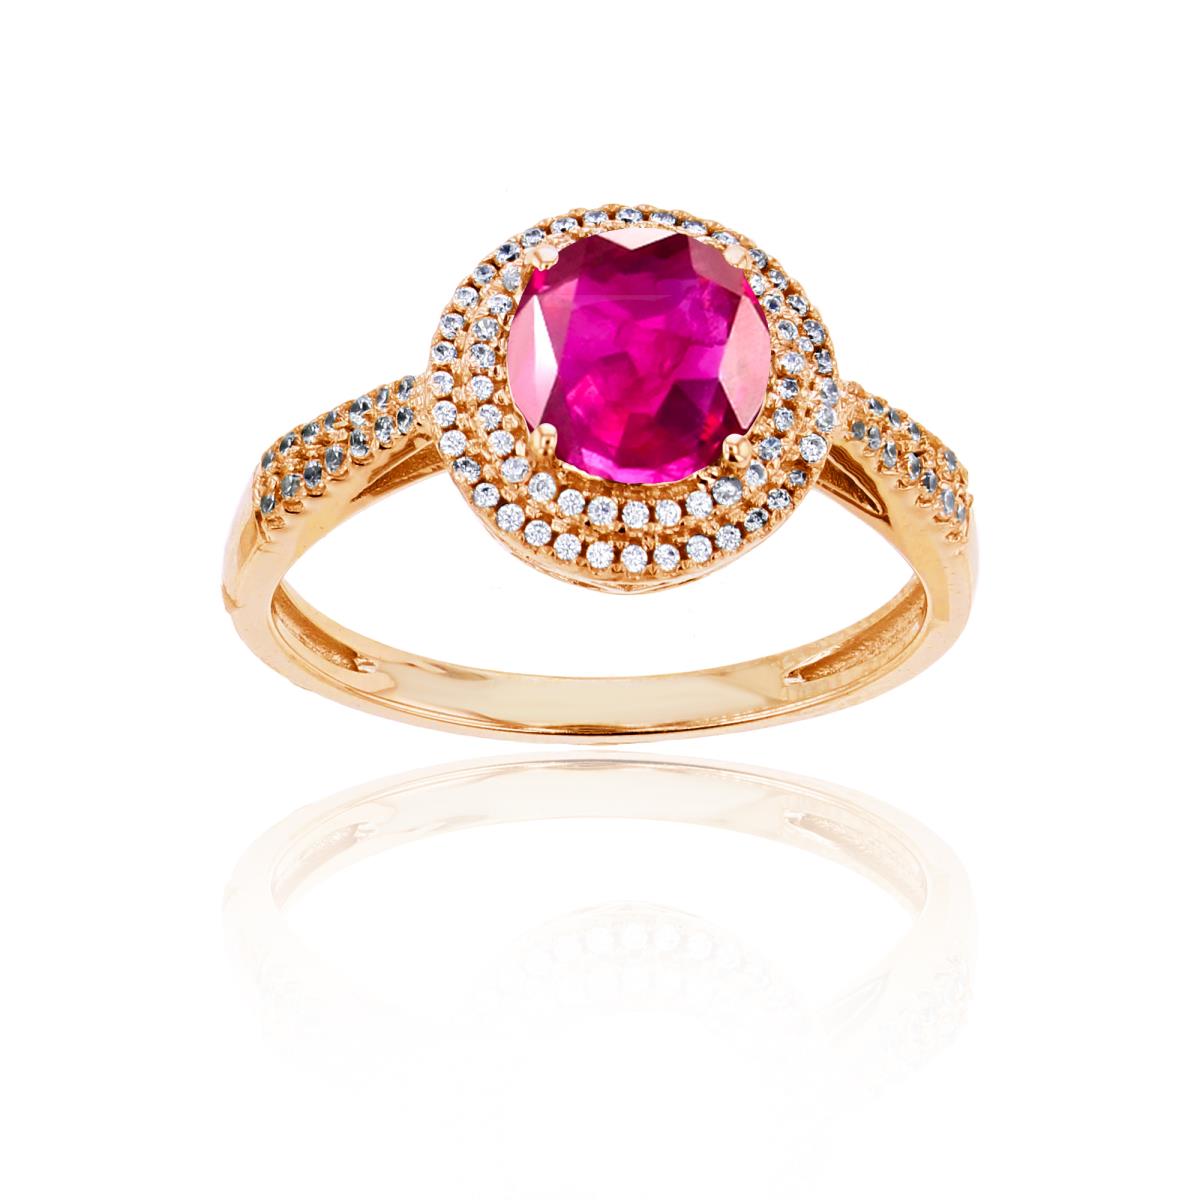 10K Yellow Gold 0.15 CTTW Rnd Diamond & 7mm Rnd Glass Filled Ruby Double Halo Ring